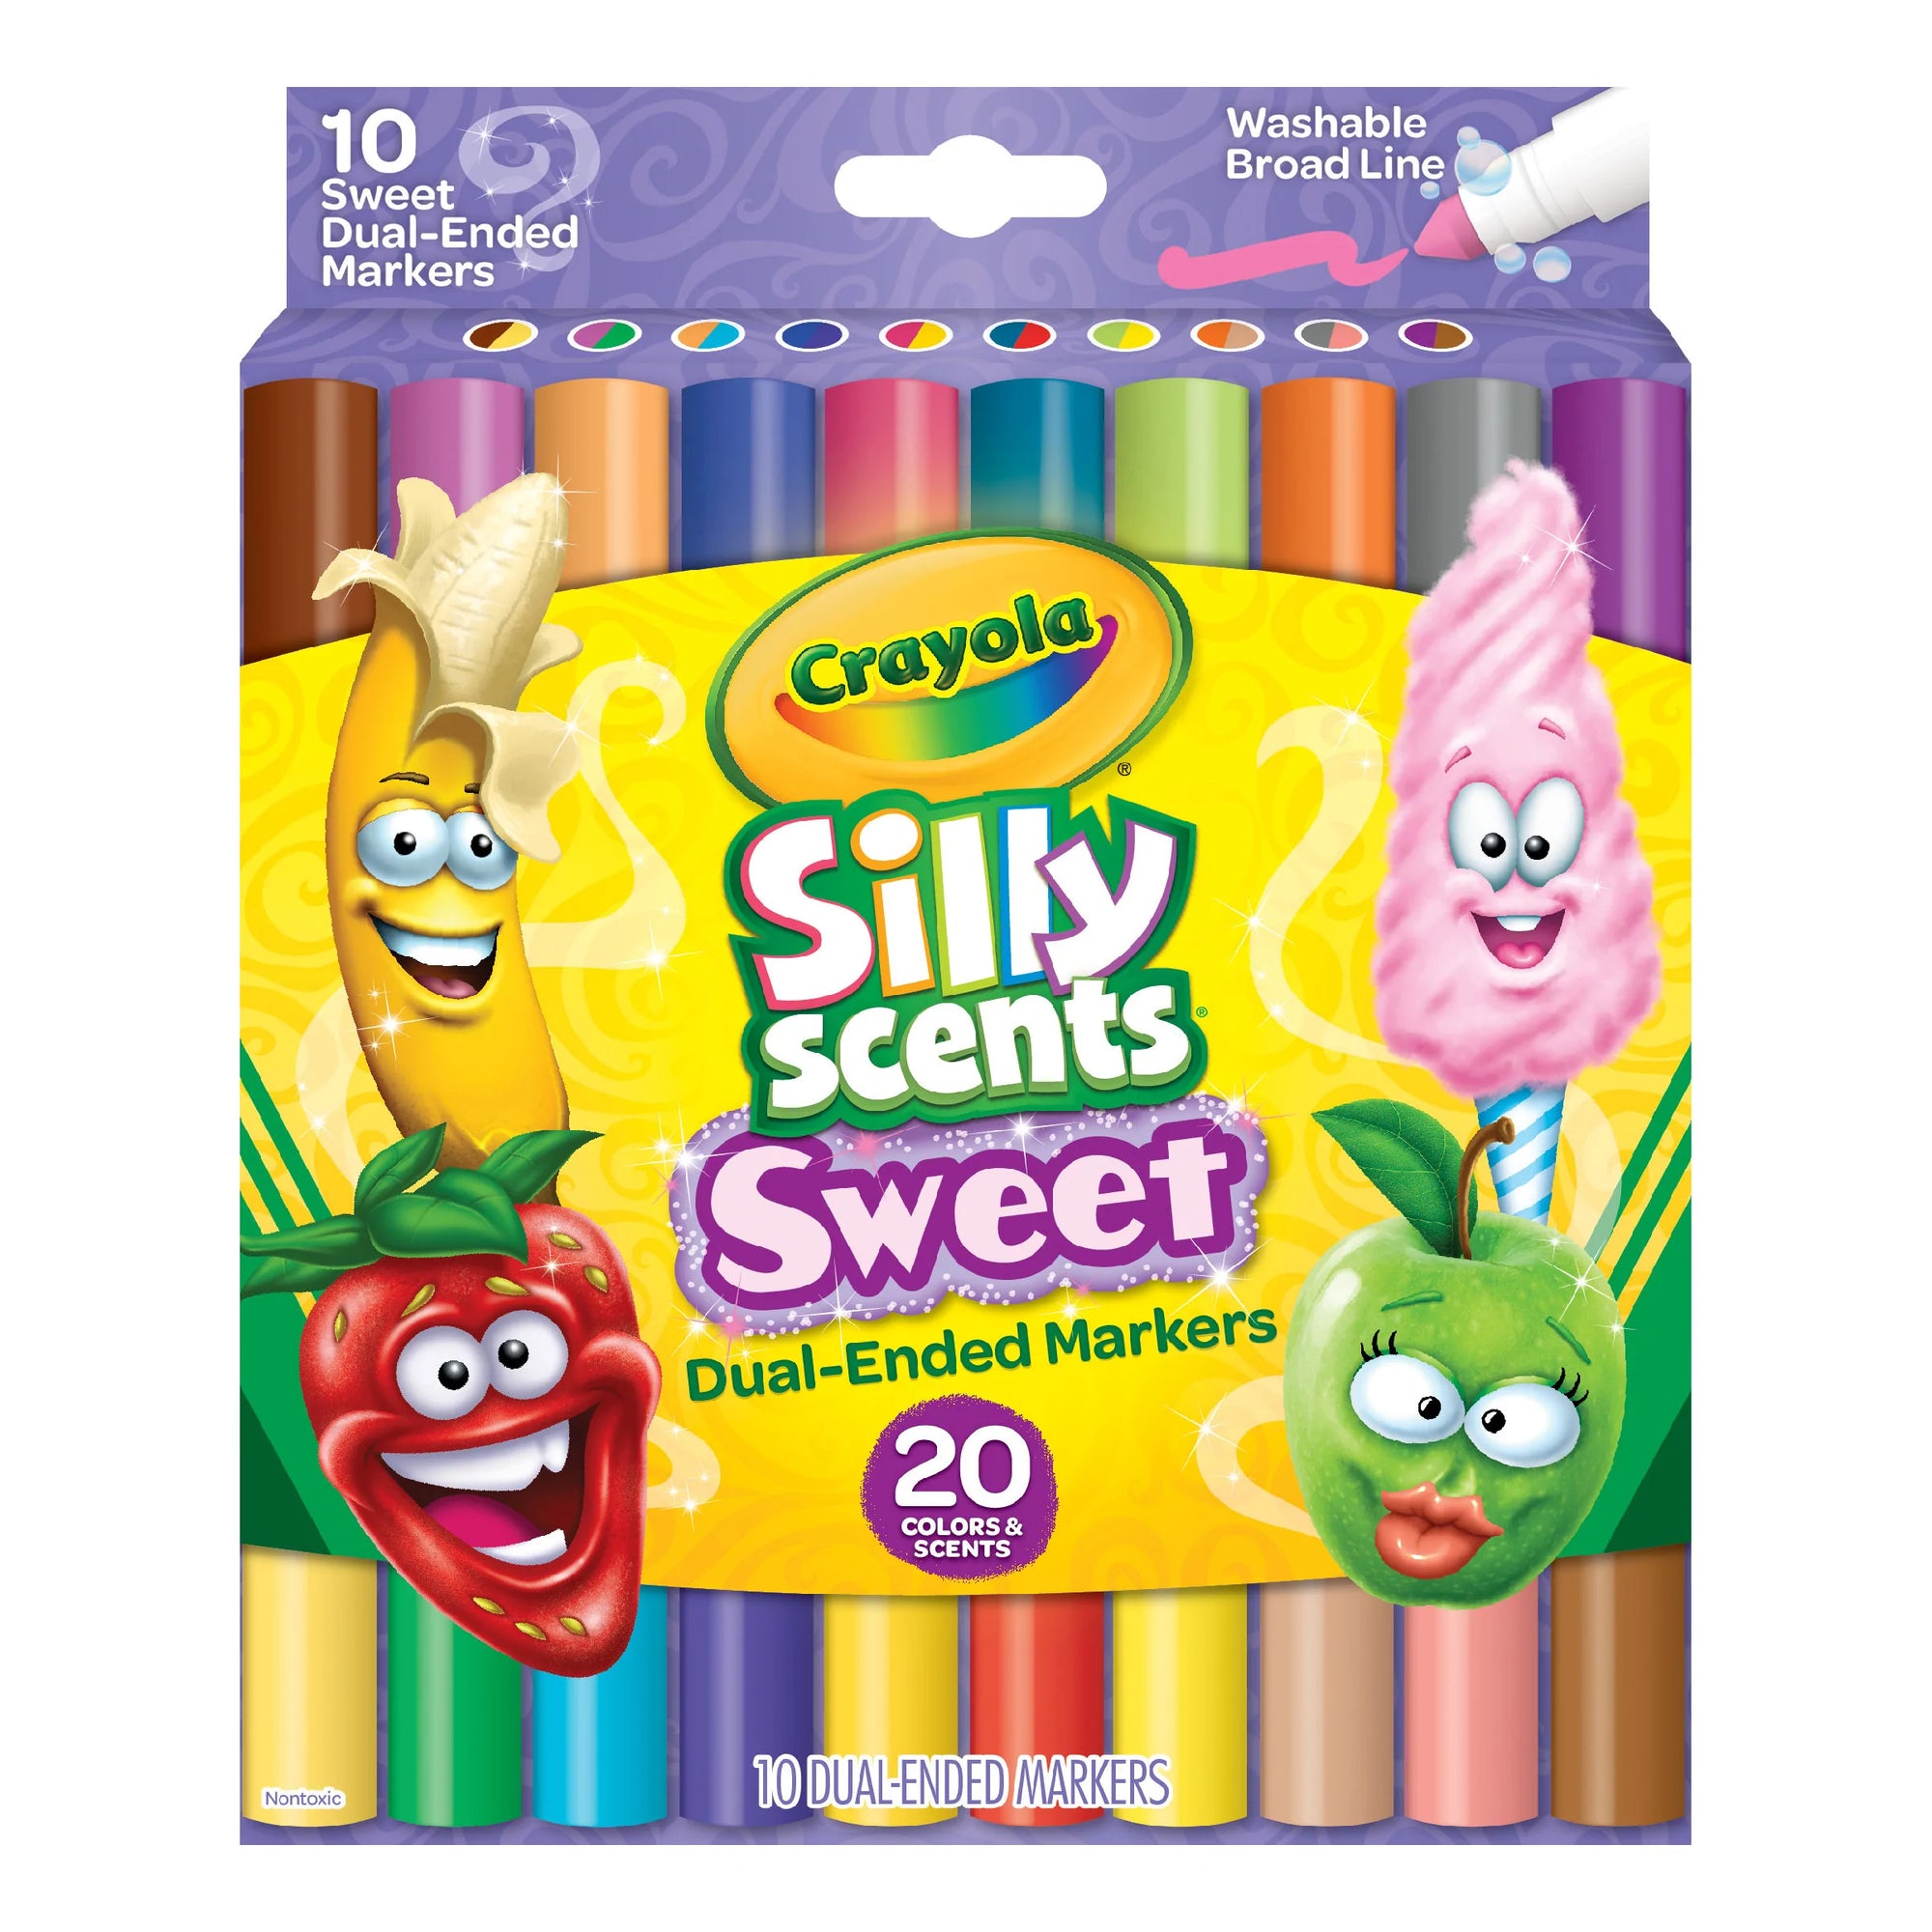 Crayola Silly Scents Sweet Dual Ended Markers 20pk